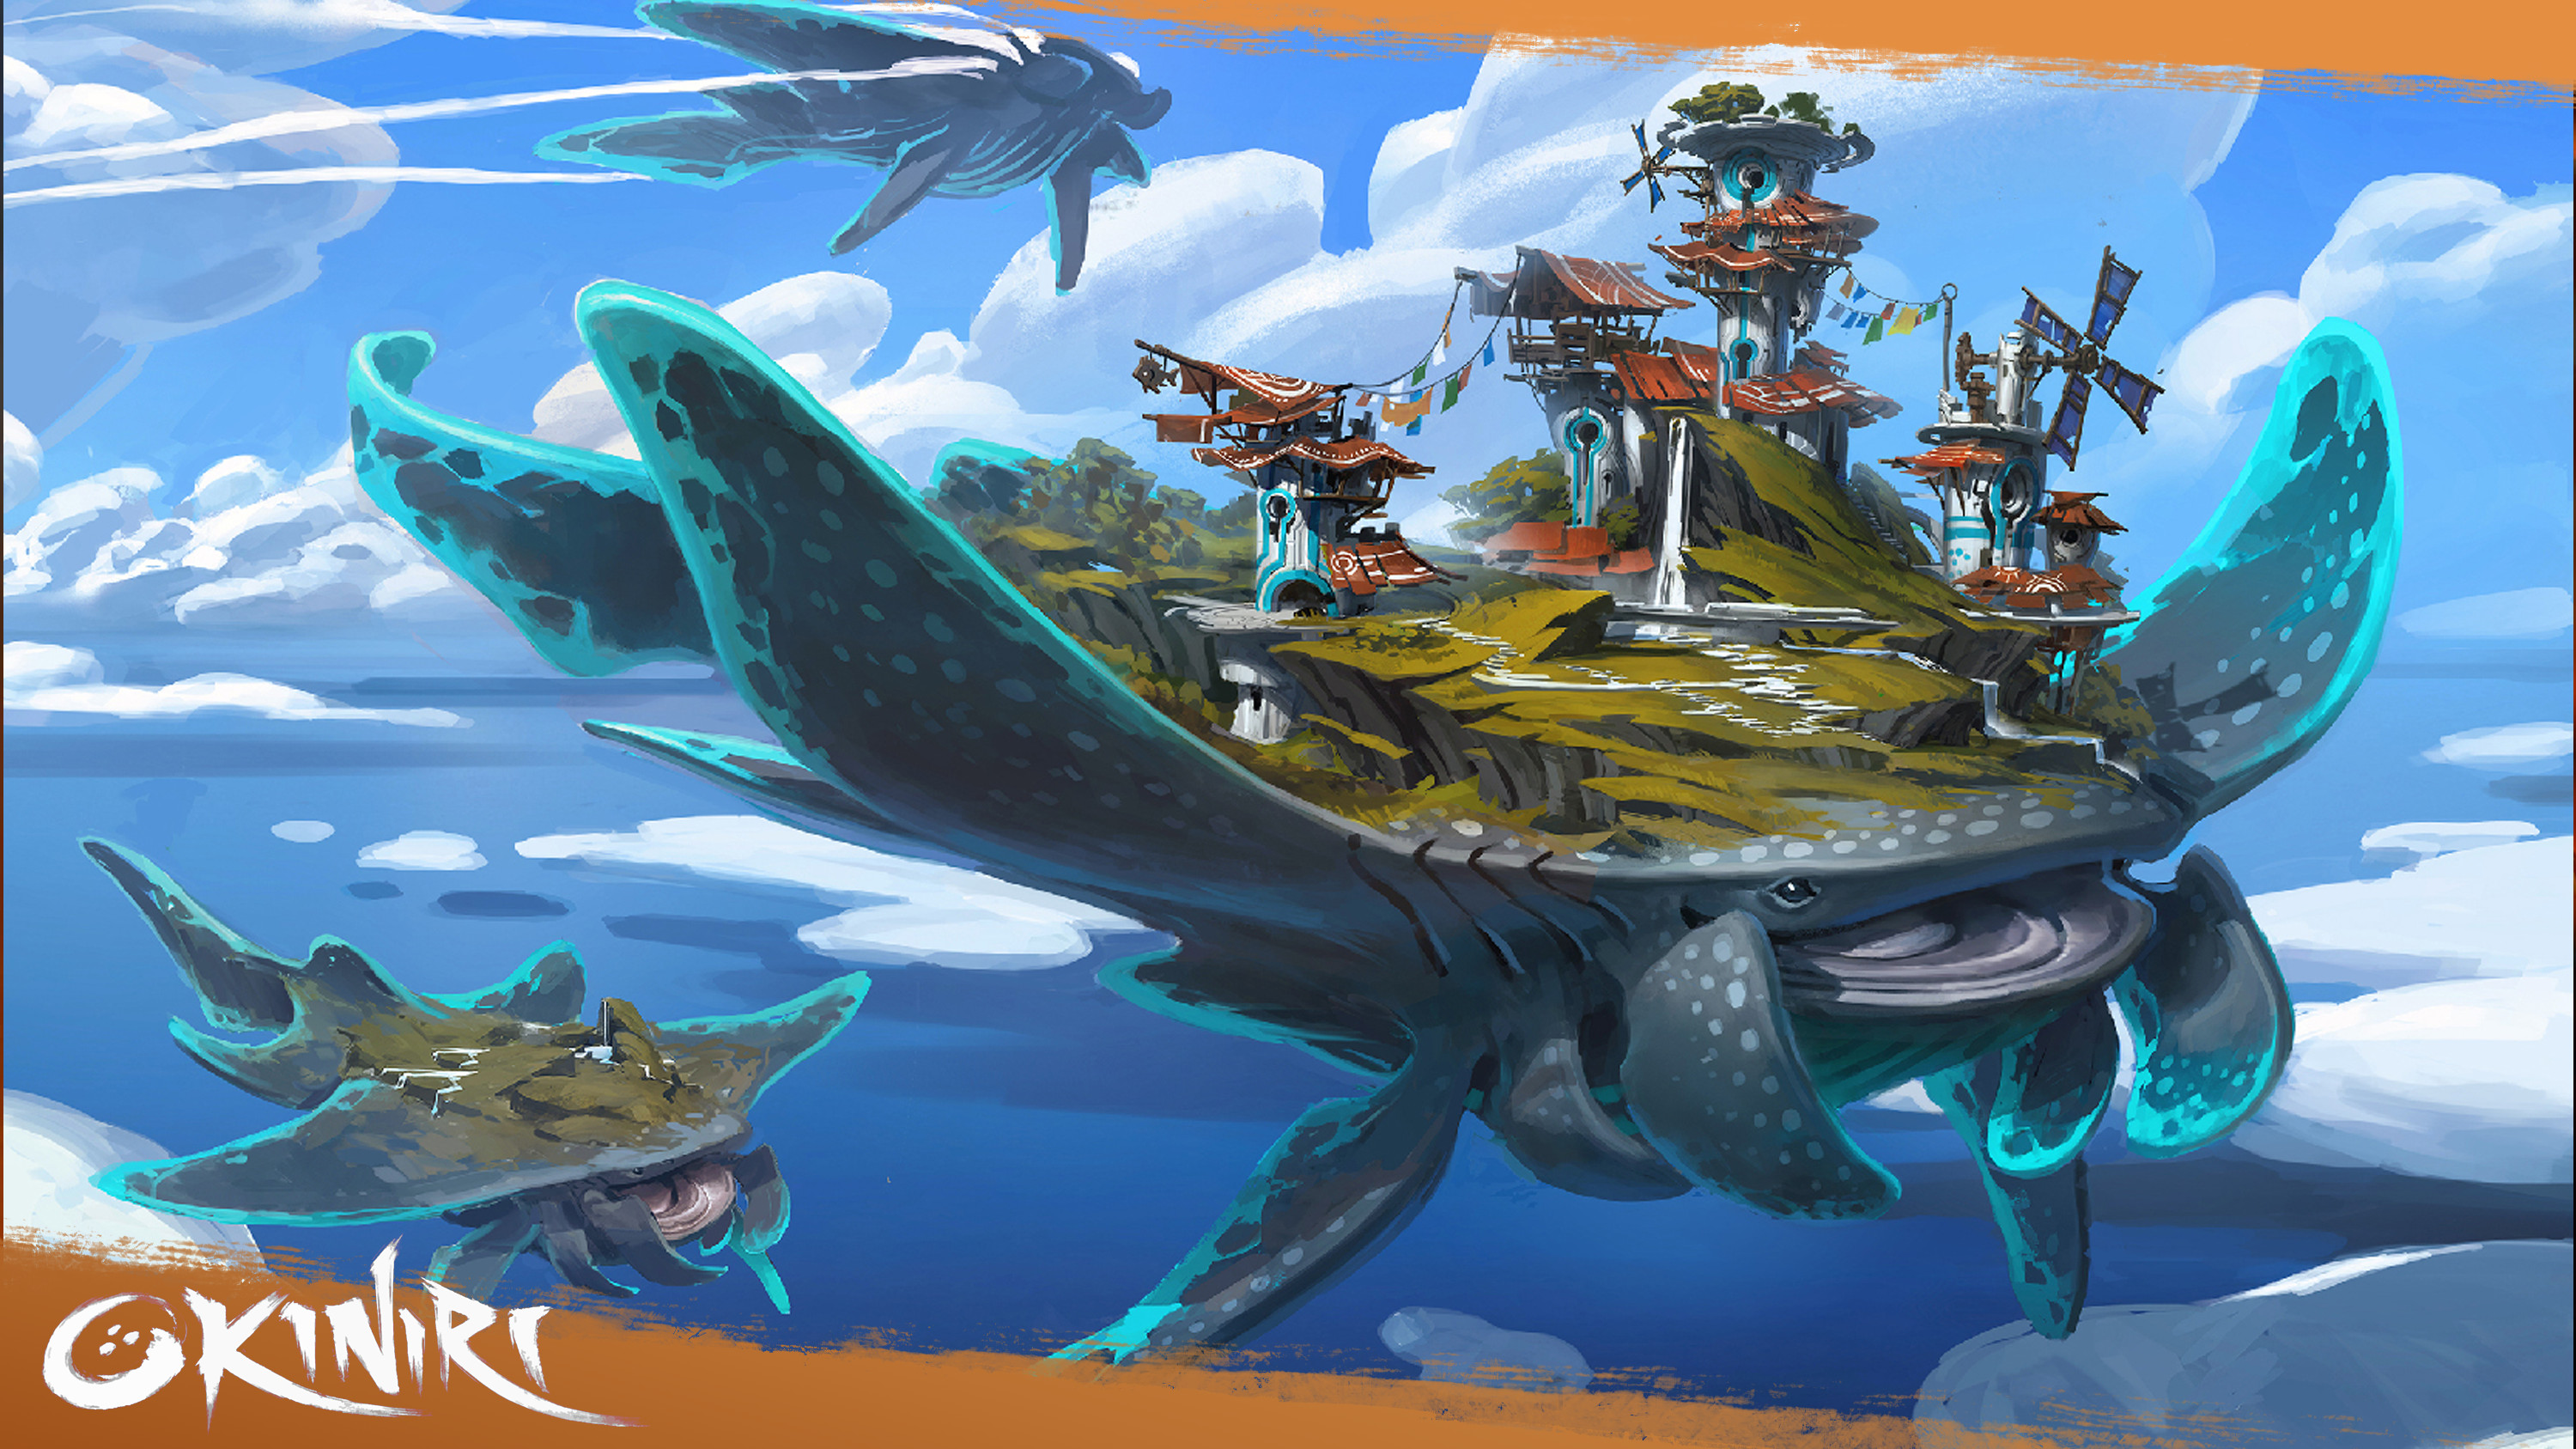 In our story, the world of Okiniri has been invaded and the inhabitants have retreated to massive flying beasts in the sky.